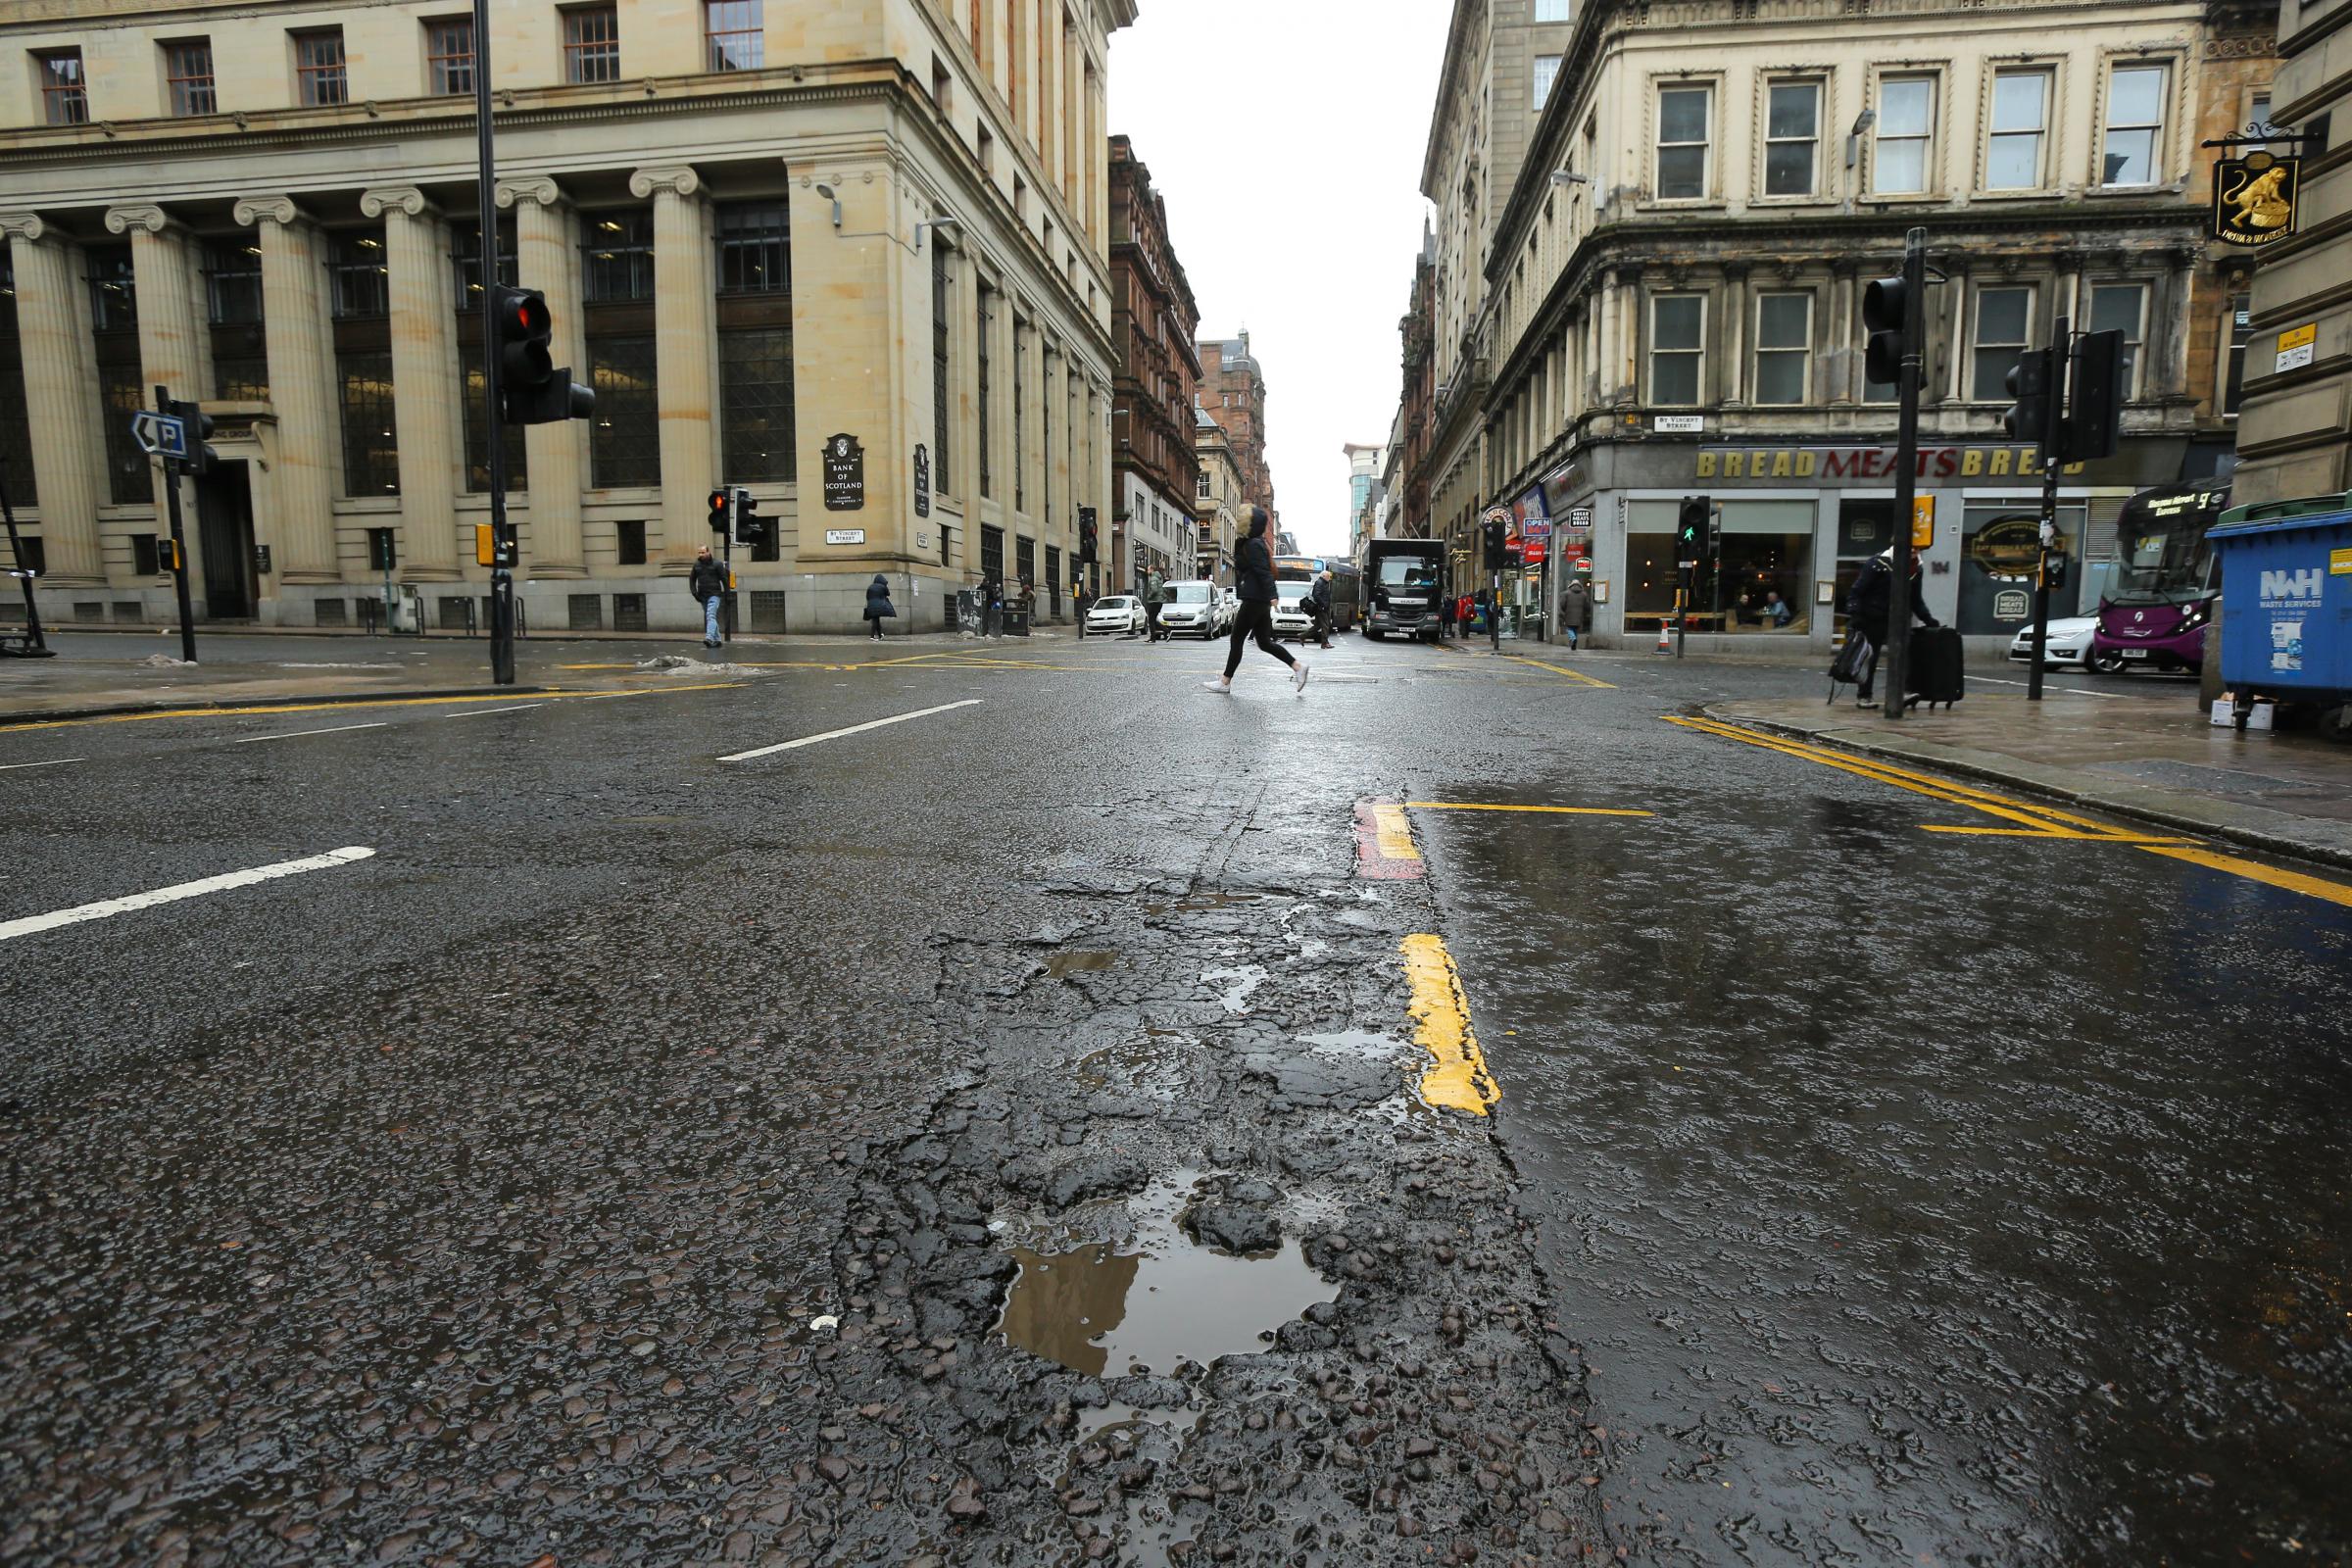 Backlog of repairs to Glasgow’s roads would cost almost £100million to complete